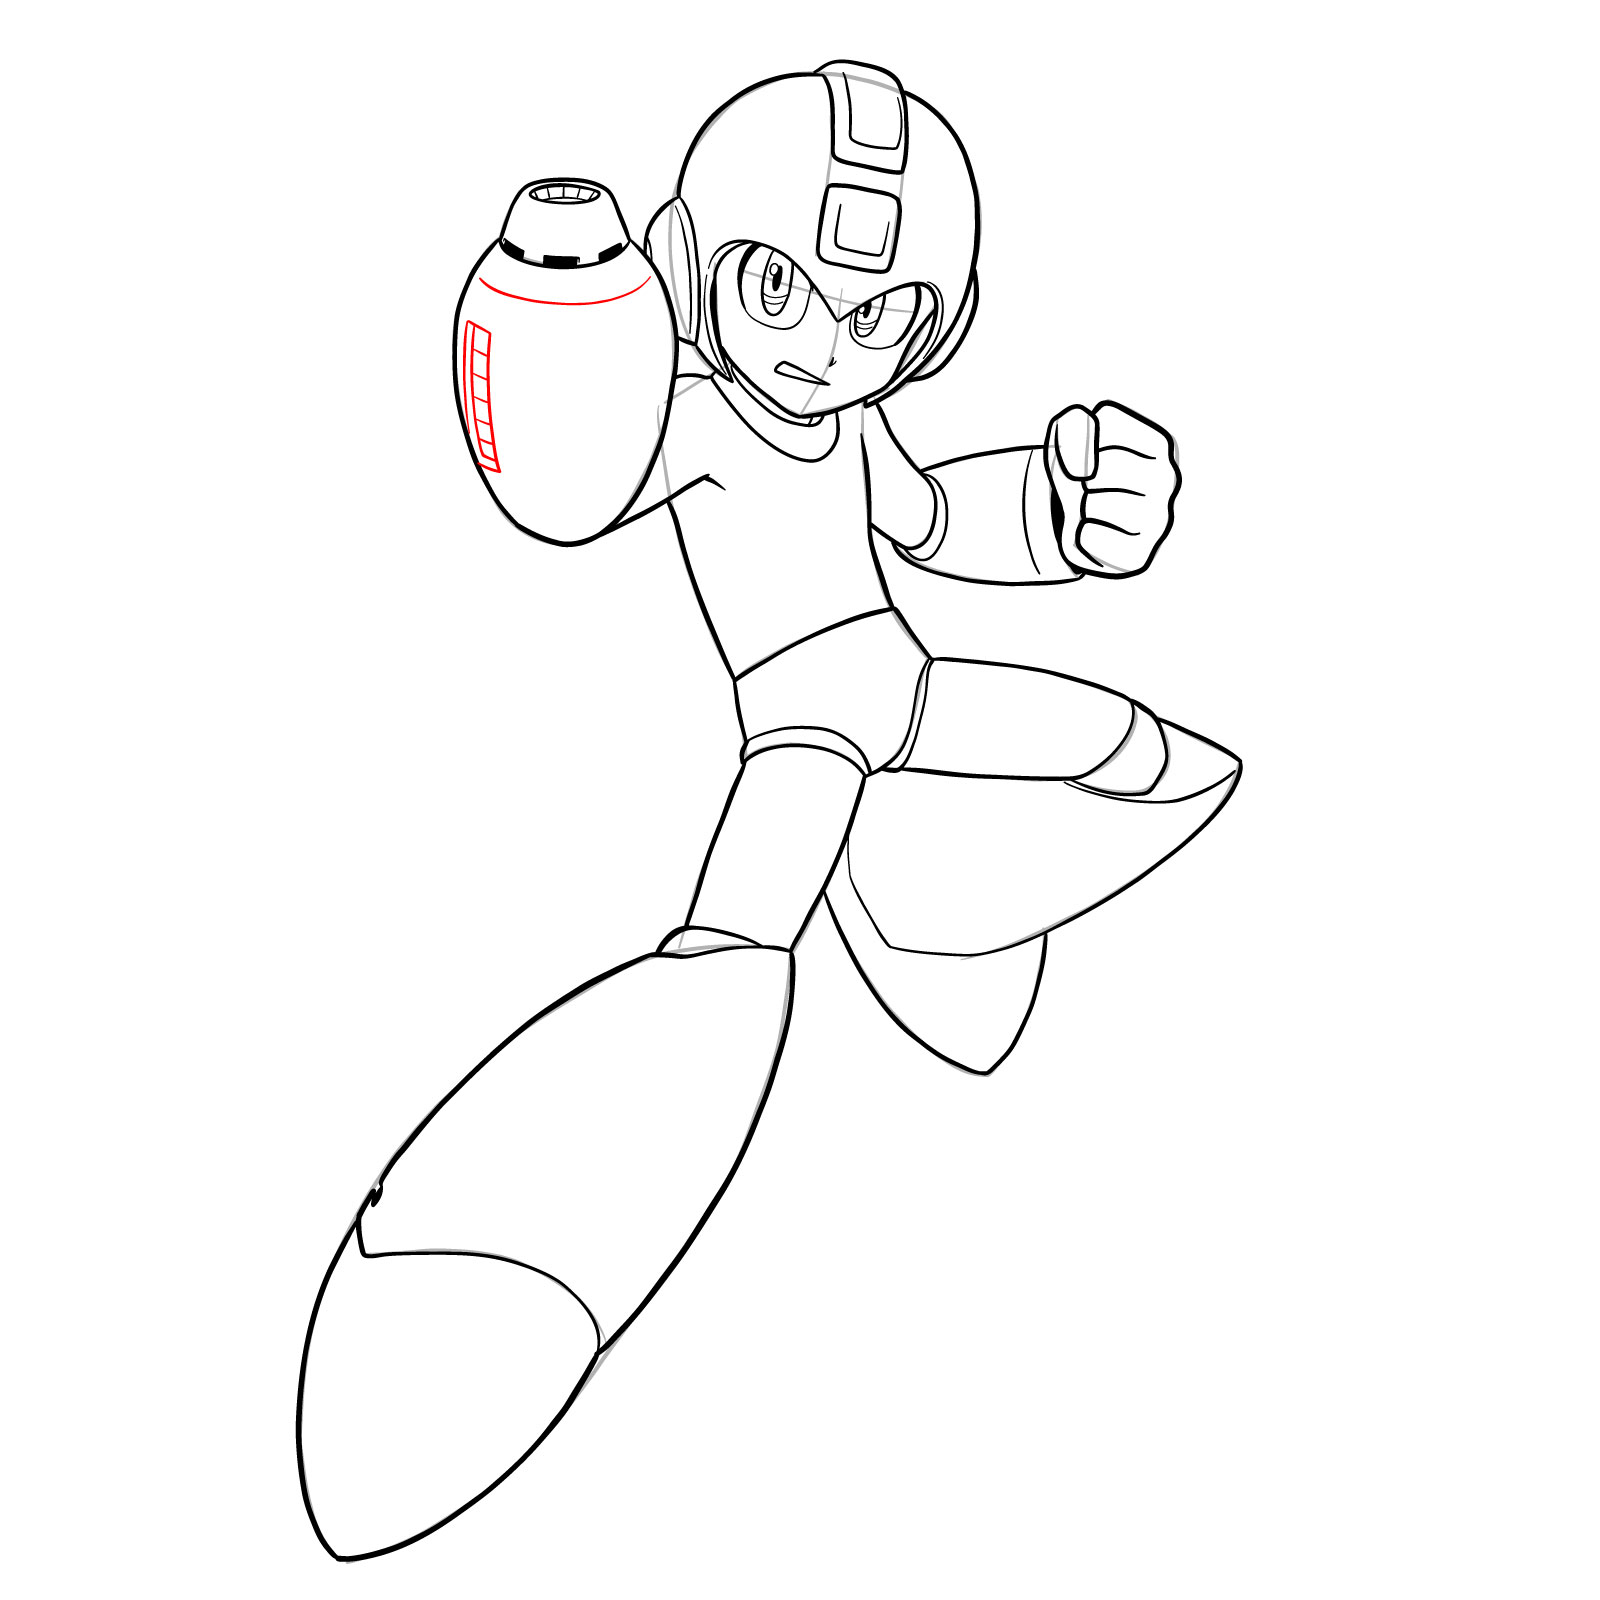 How to draw Mega Man from the 11th game - step 30